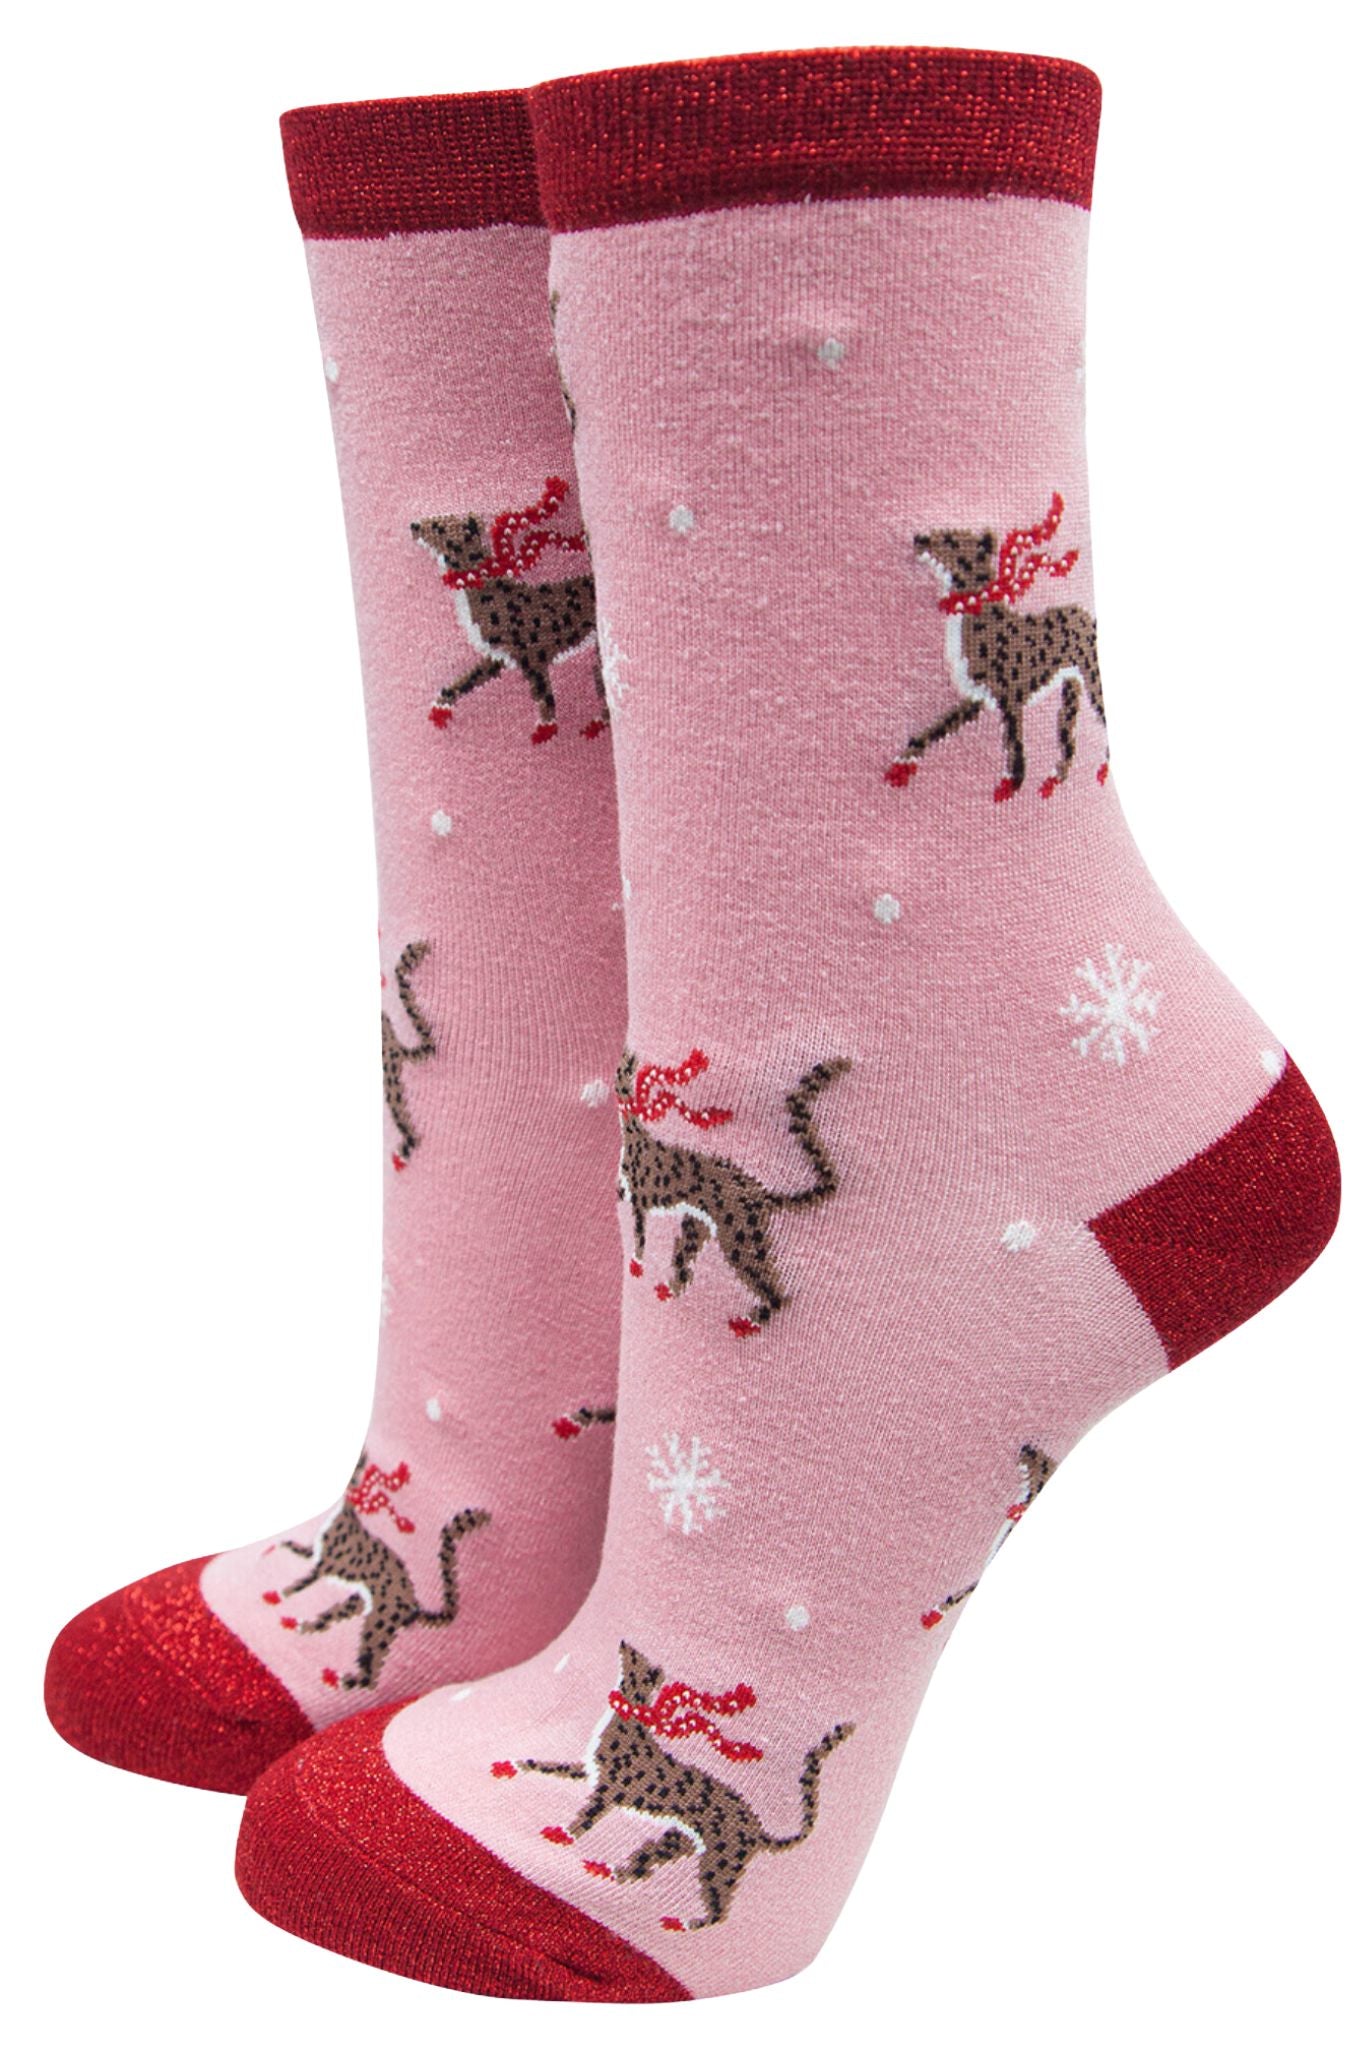 pink bamboo socks with cheetah cats, red glitter trim, toe and heel